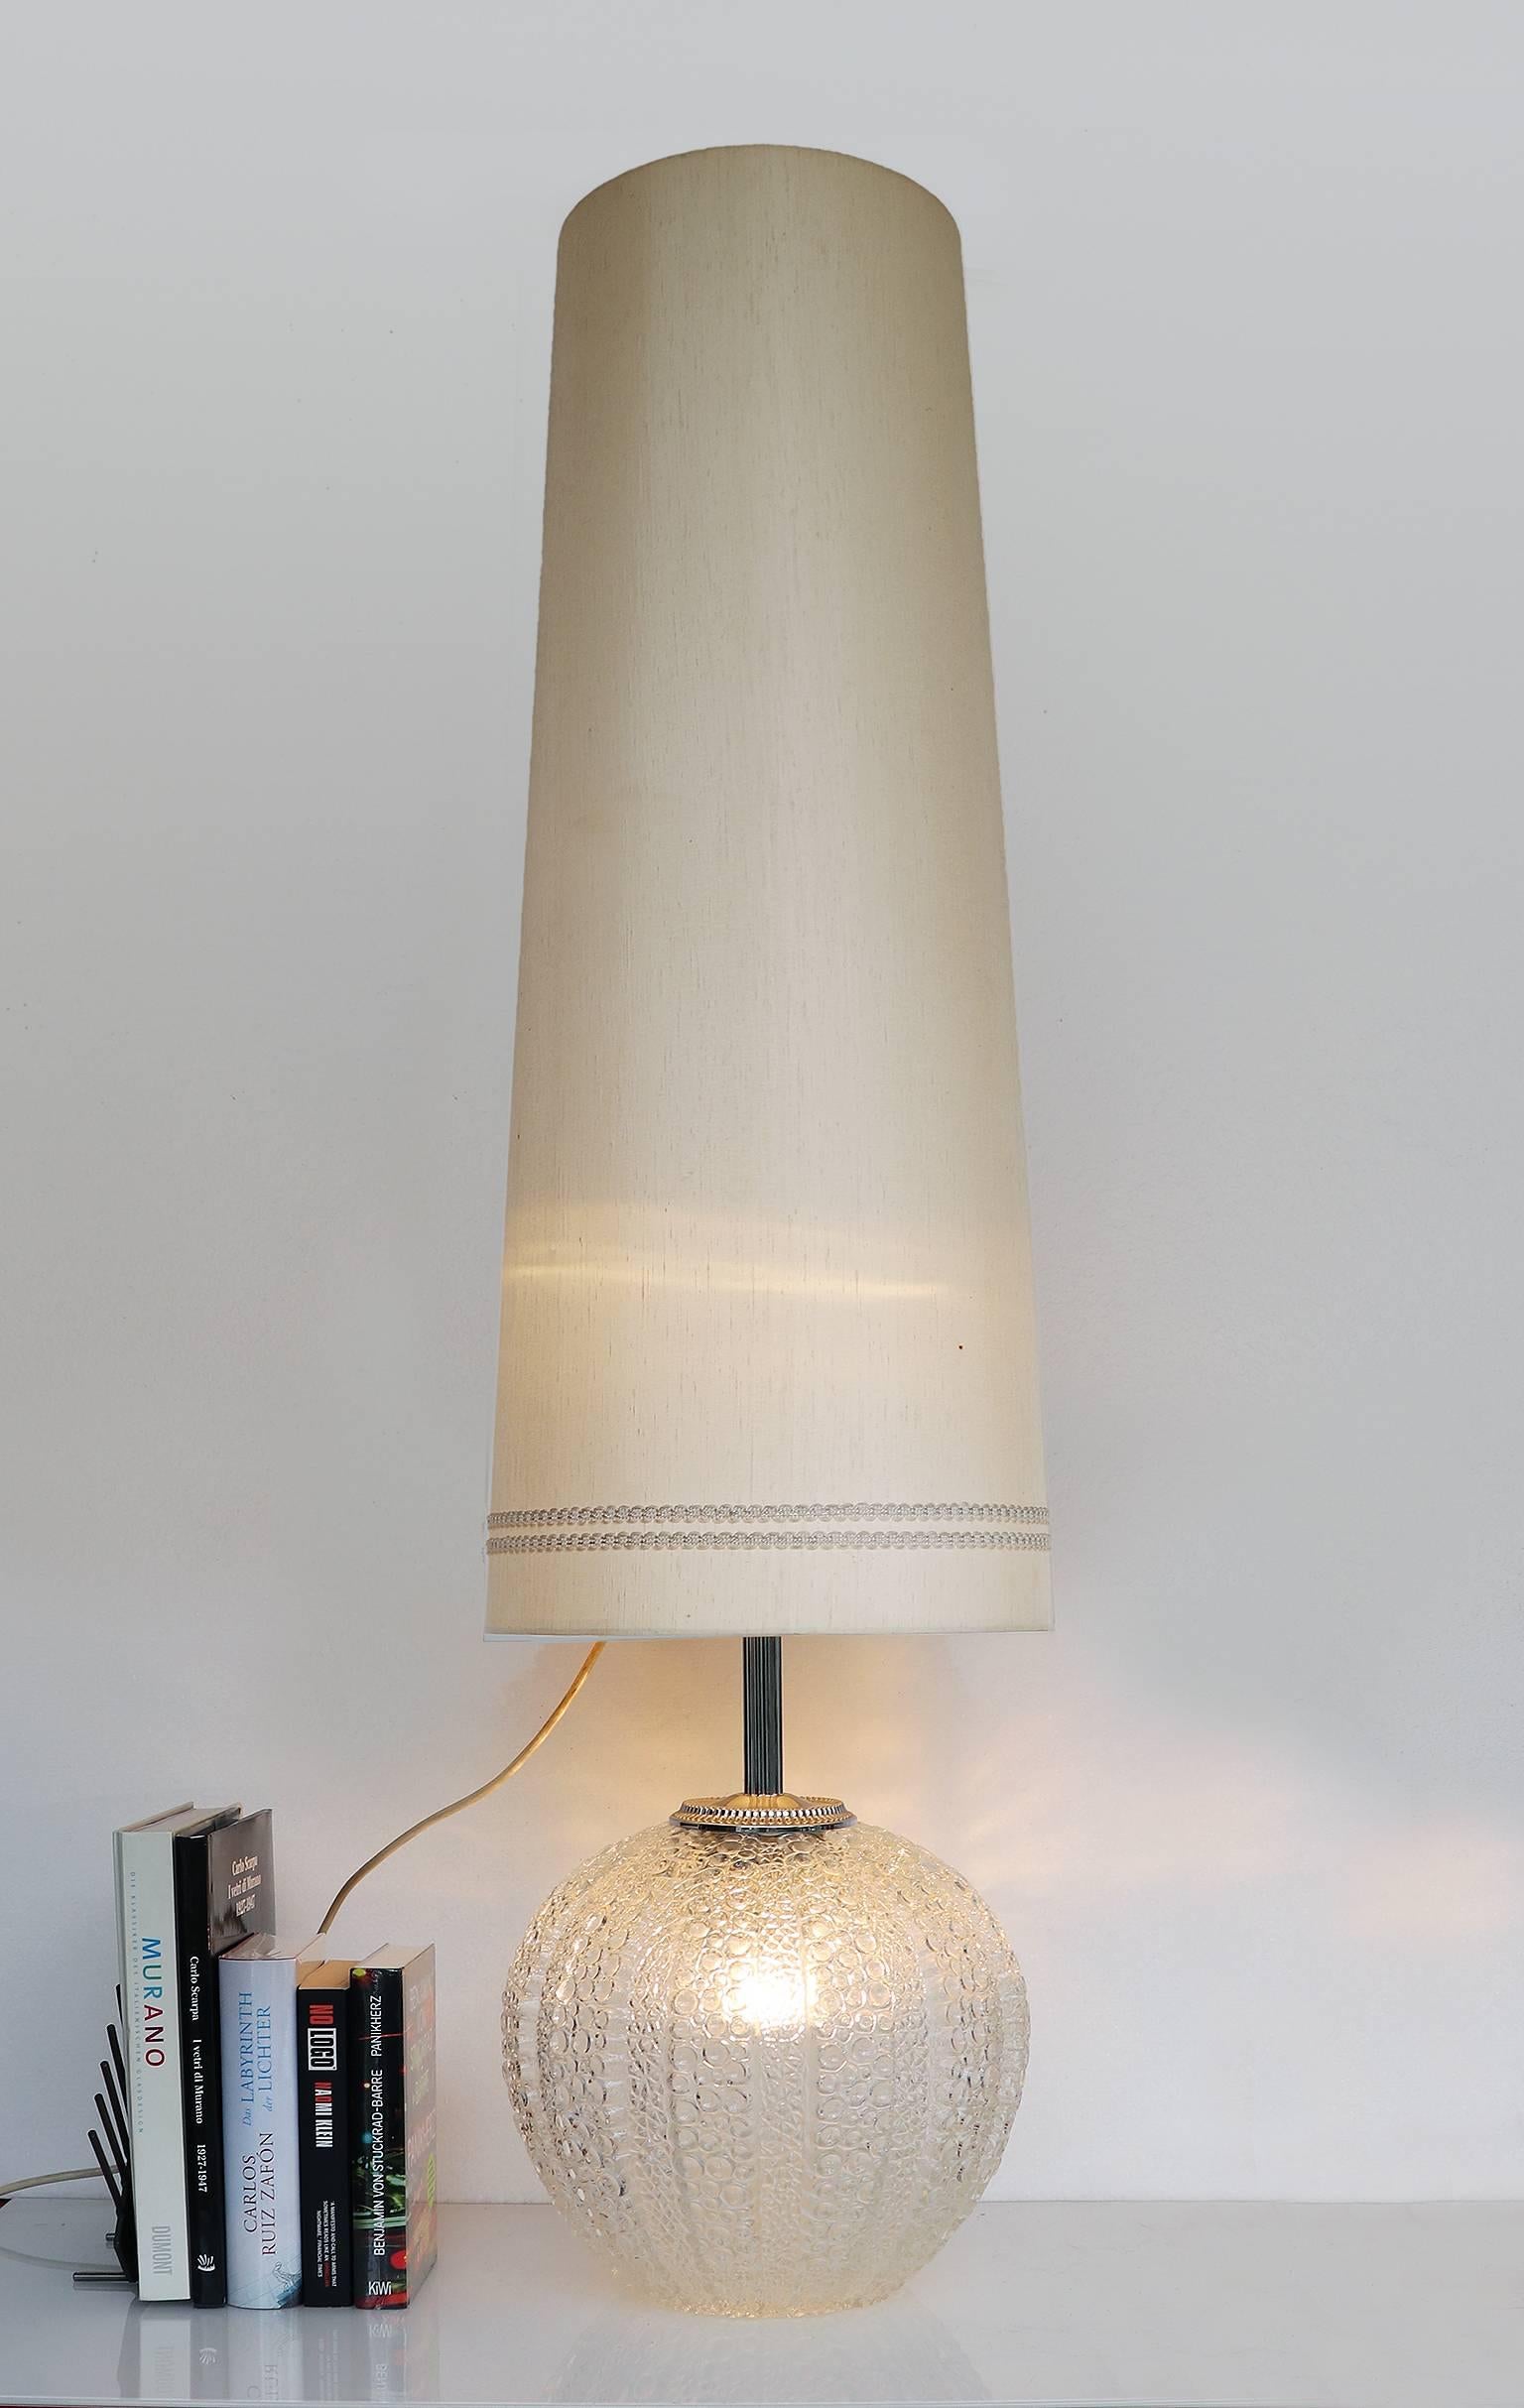 Elegant floor light with aspherical base in bubble glass with two-light settings by Hustadt Lighting, Germany, 1960s. 

Measures: height without shade and bulb: 23.6